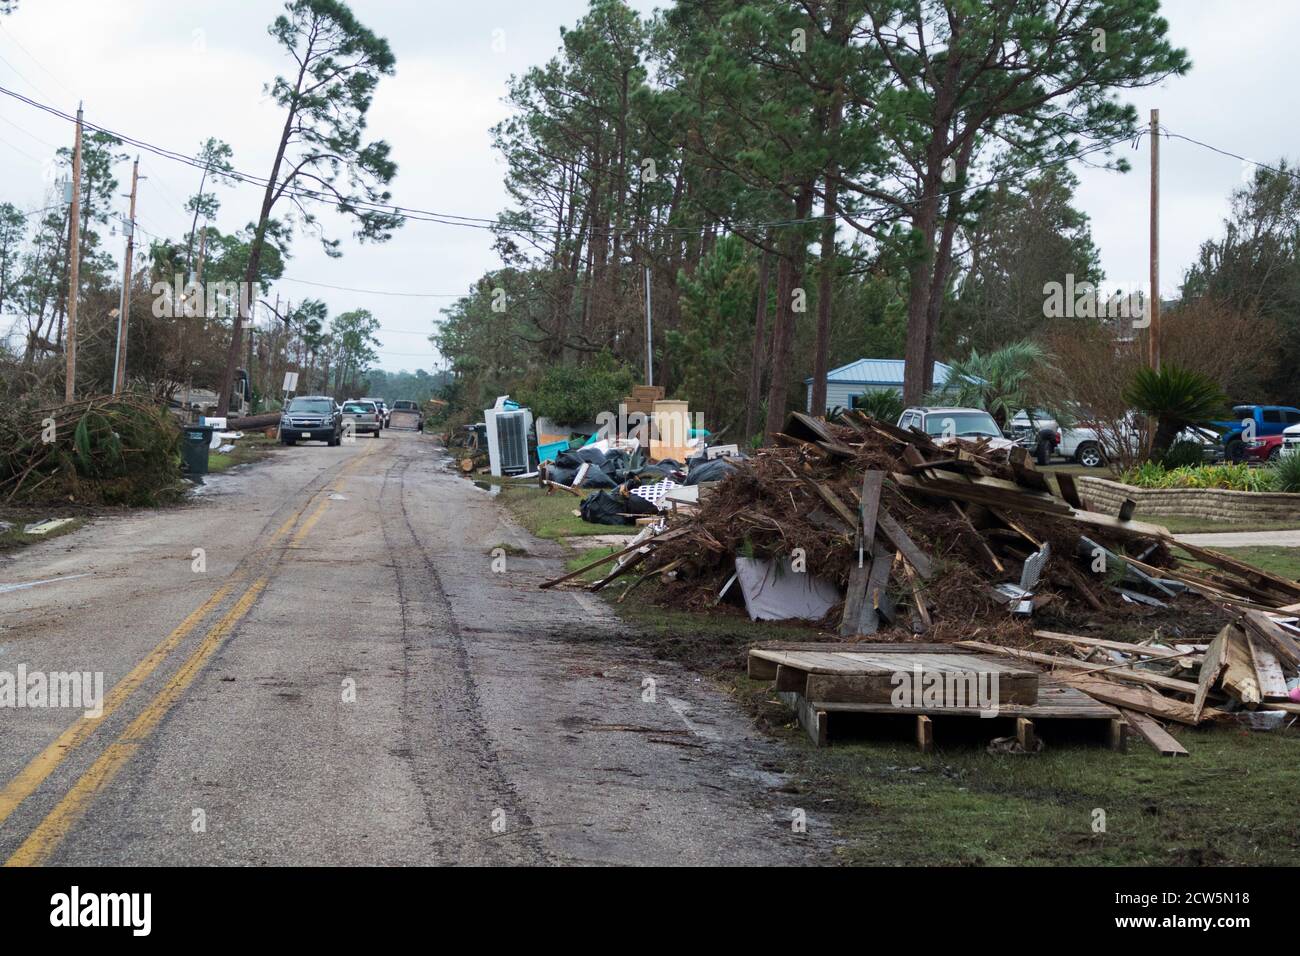 Debris placed at roadside in the Bass Point community near Perdido Bay in south Alabama, USA, following Hurricane Sally. Stock Photo